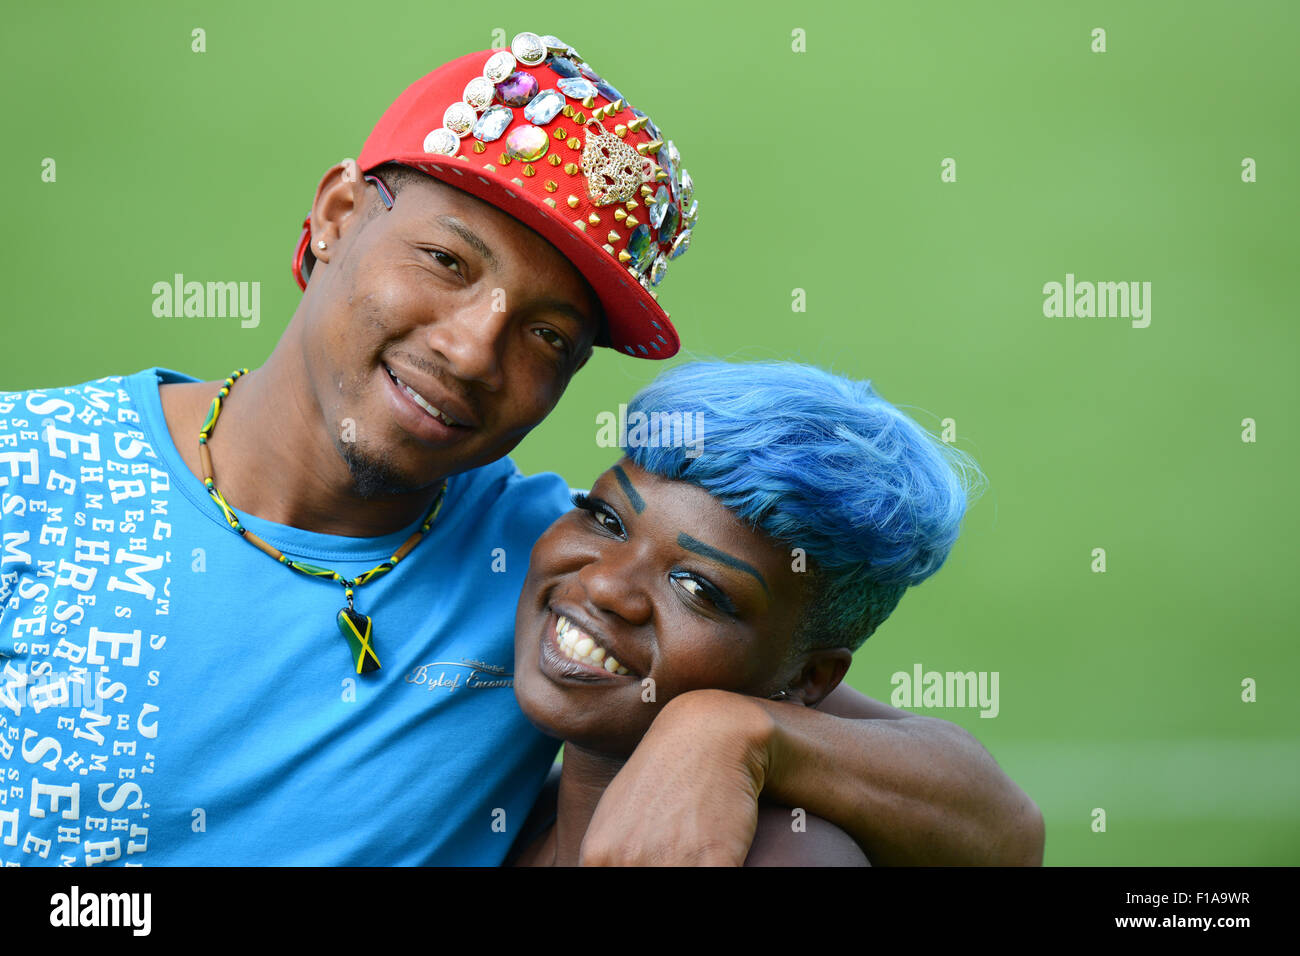 Happy smiling couple man and woman with hair dyed blue Uk Stock Photo